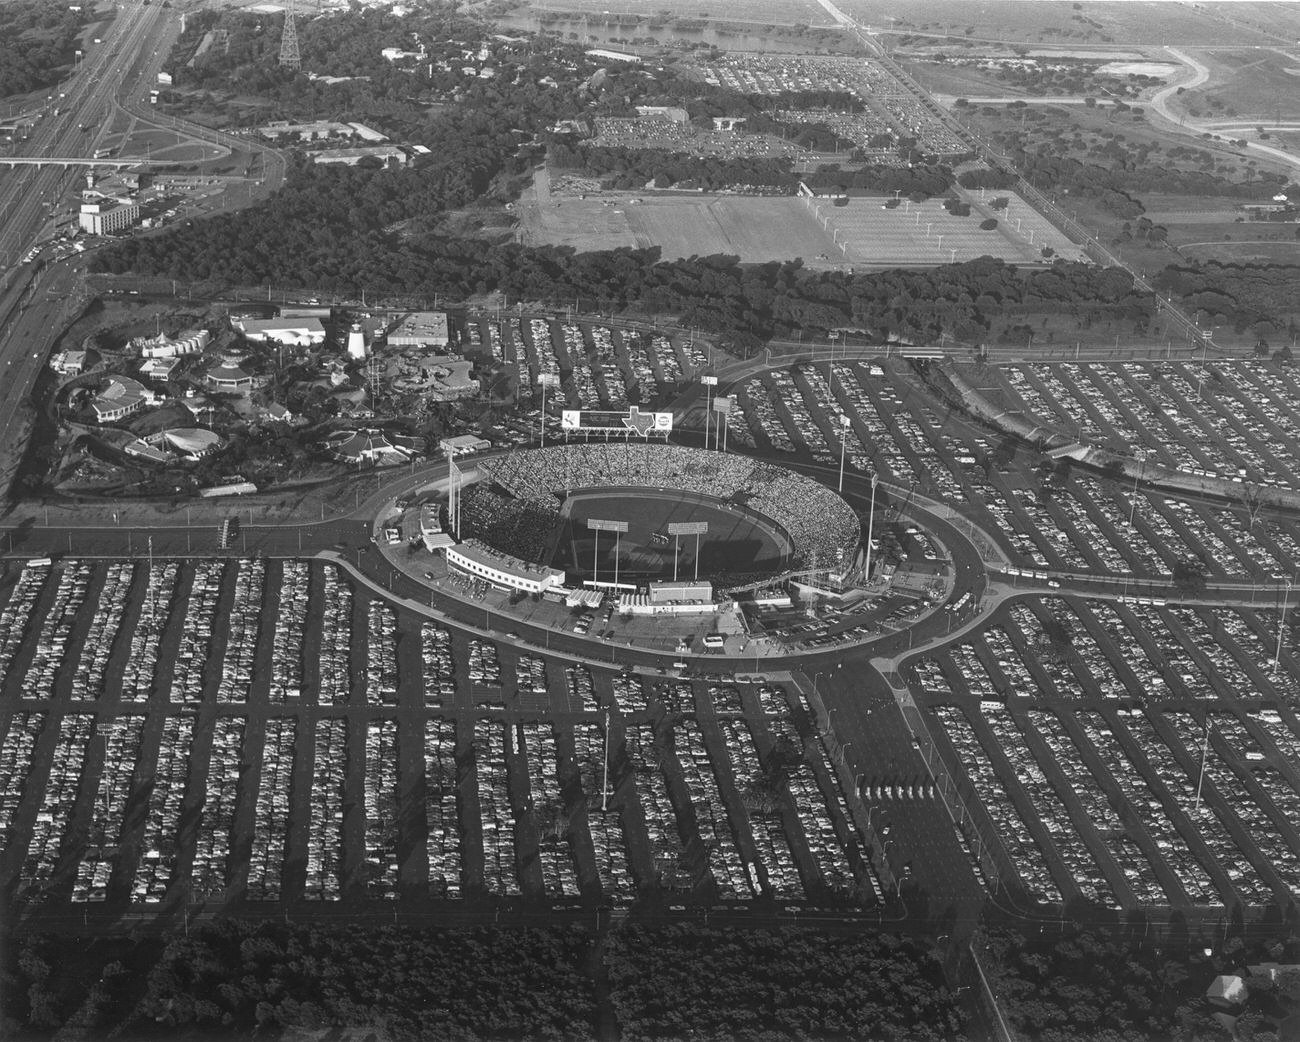 Aerial view of Arlington Stadium and parking lots, 1973